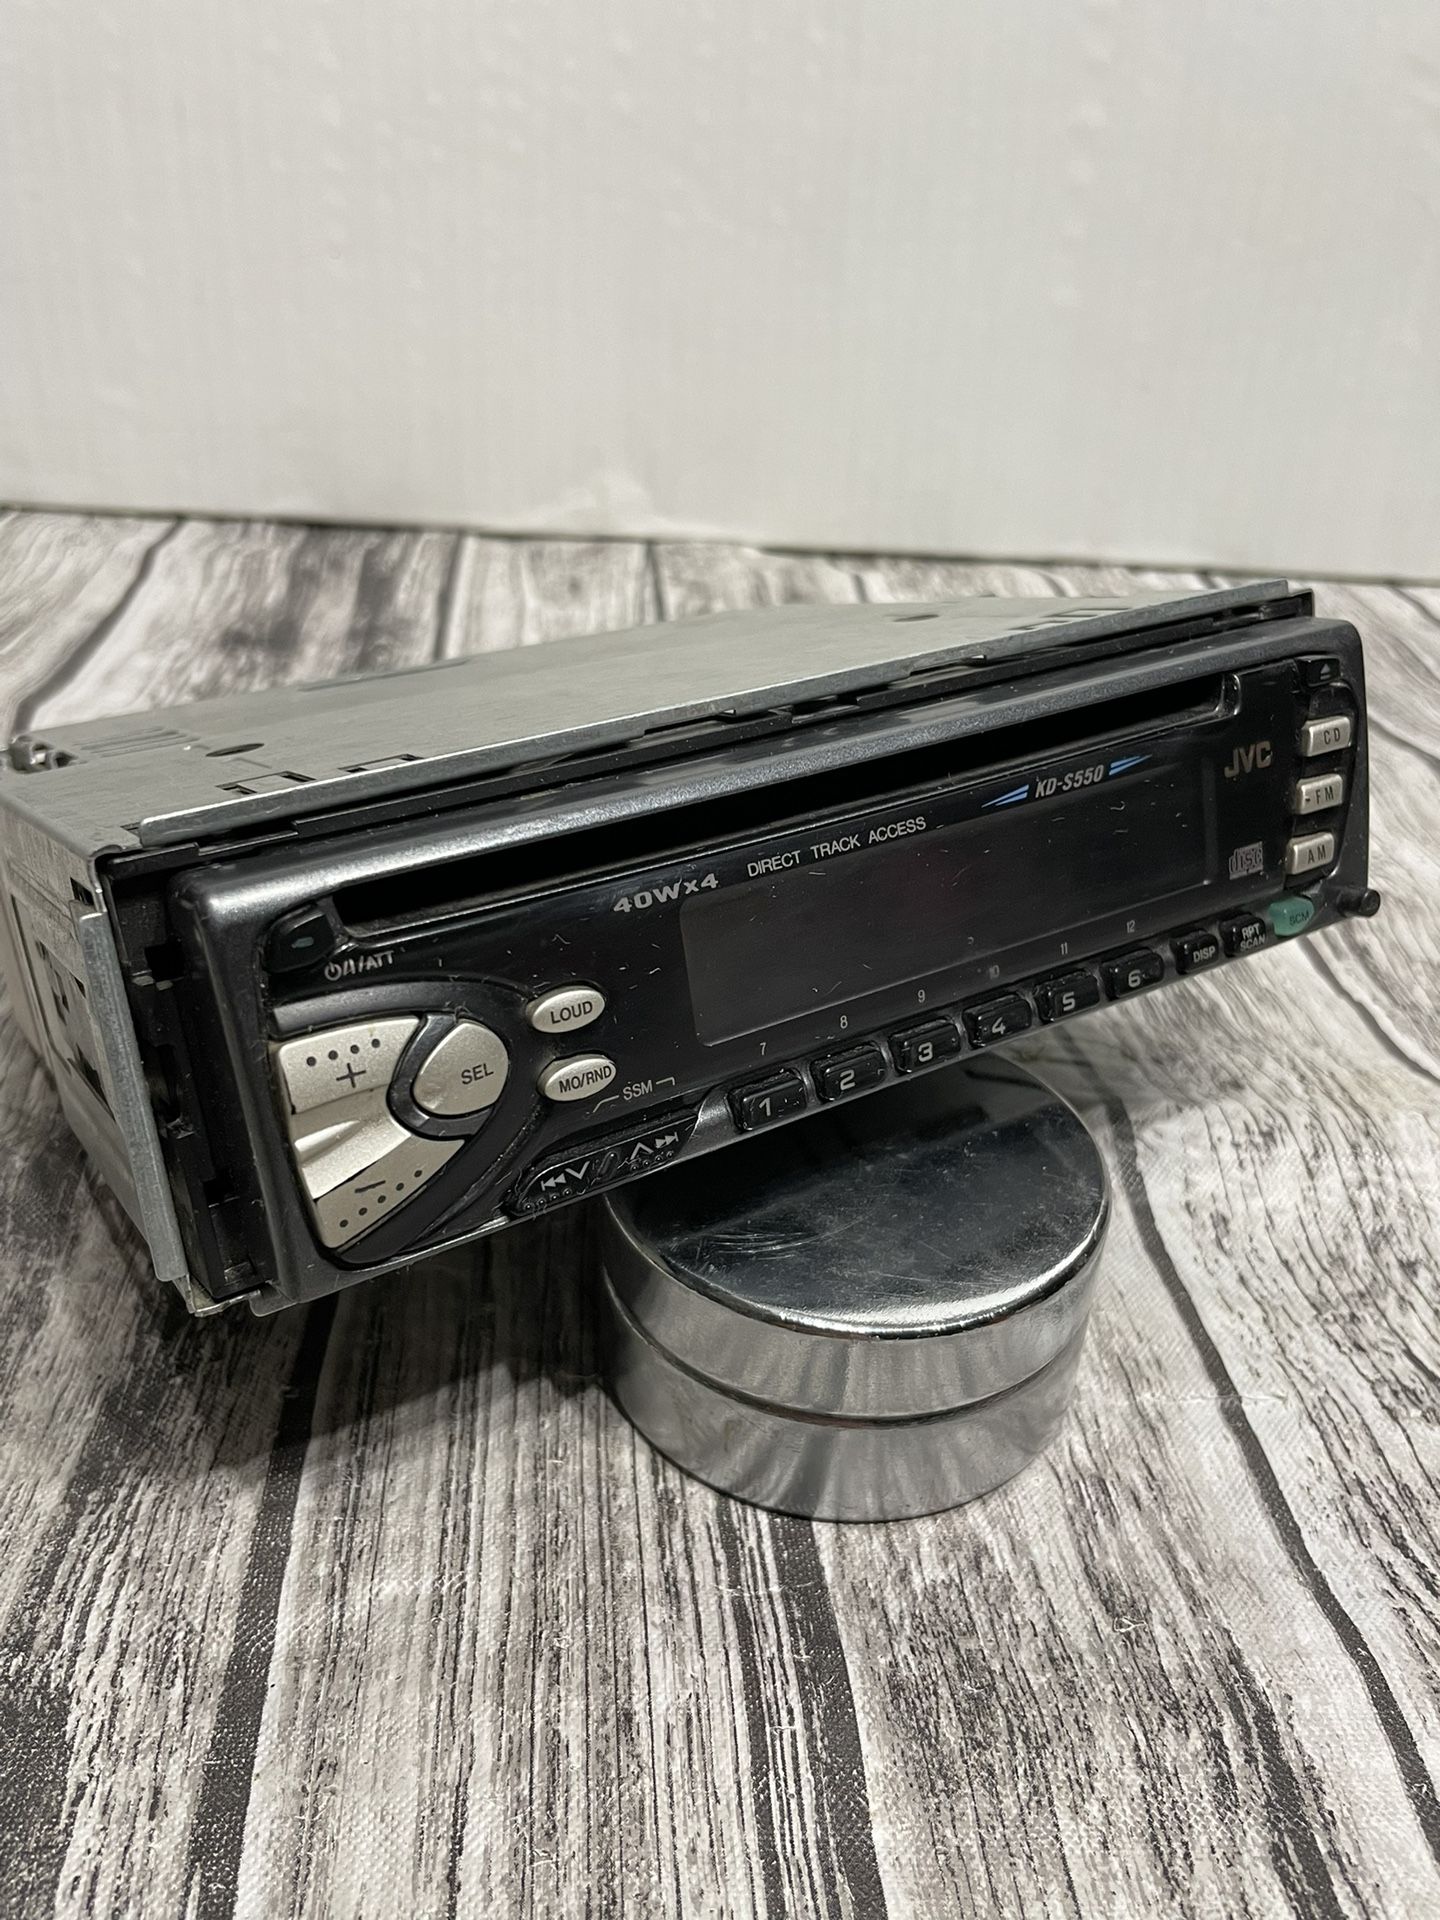 I JVC KD-S550 car stereo receiver CD player *untested* but appears to be in good condition 